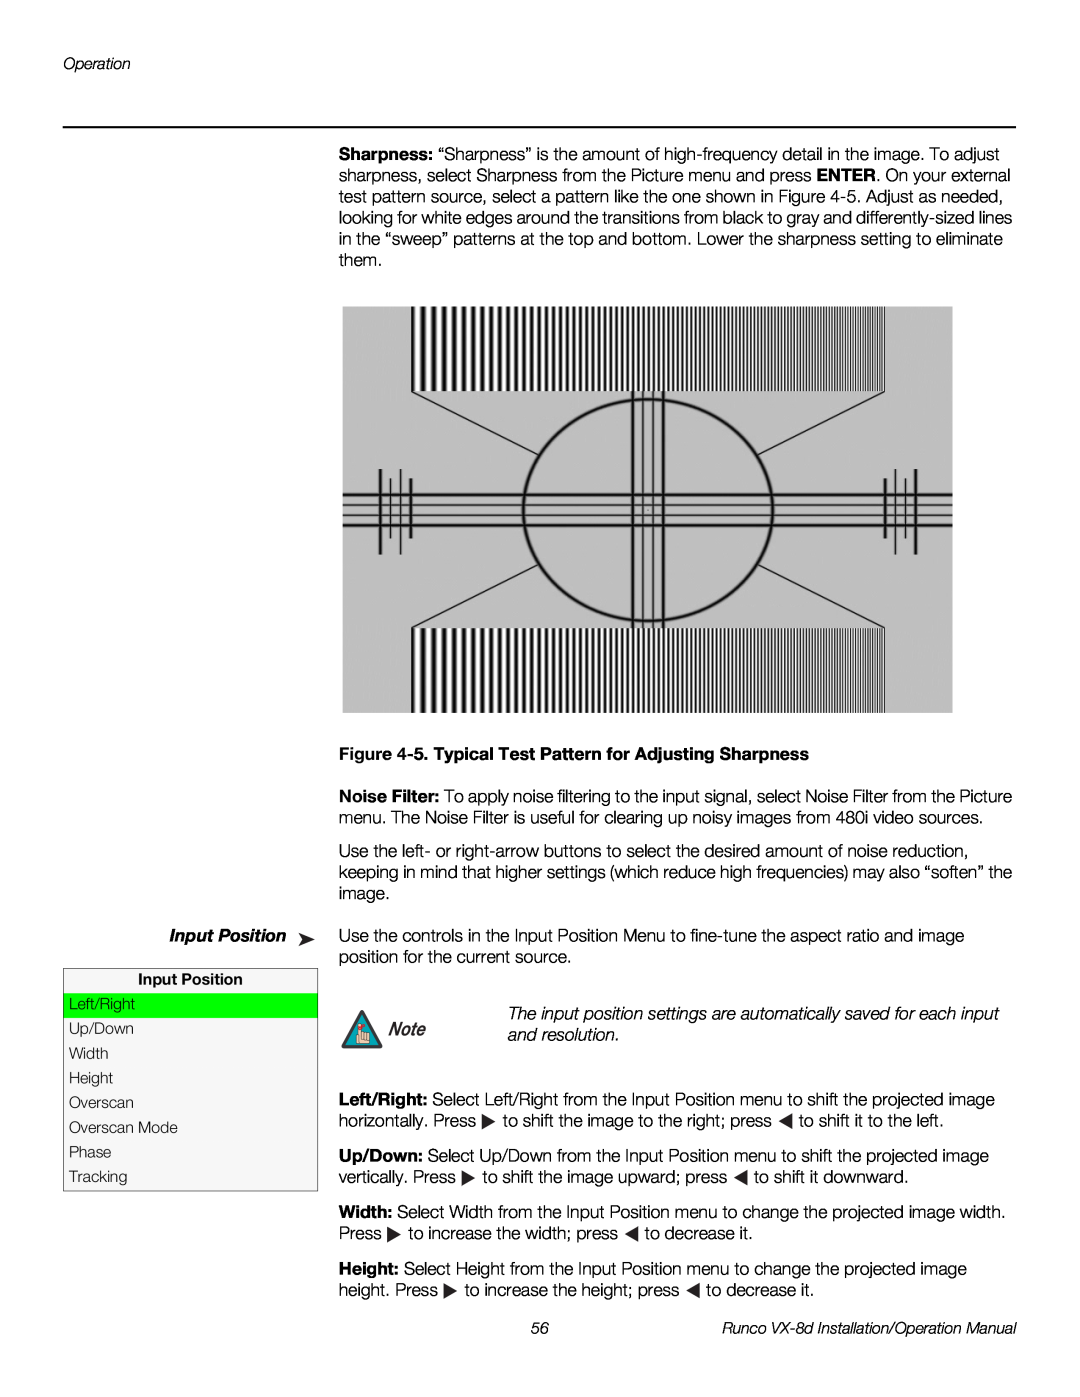 Runco VX-8D operation manual Input Position, 5. Typical Test Pattern for Adjusting Sharpness, and resolution 